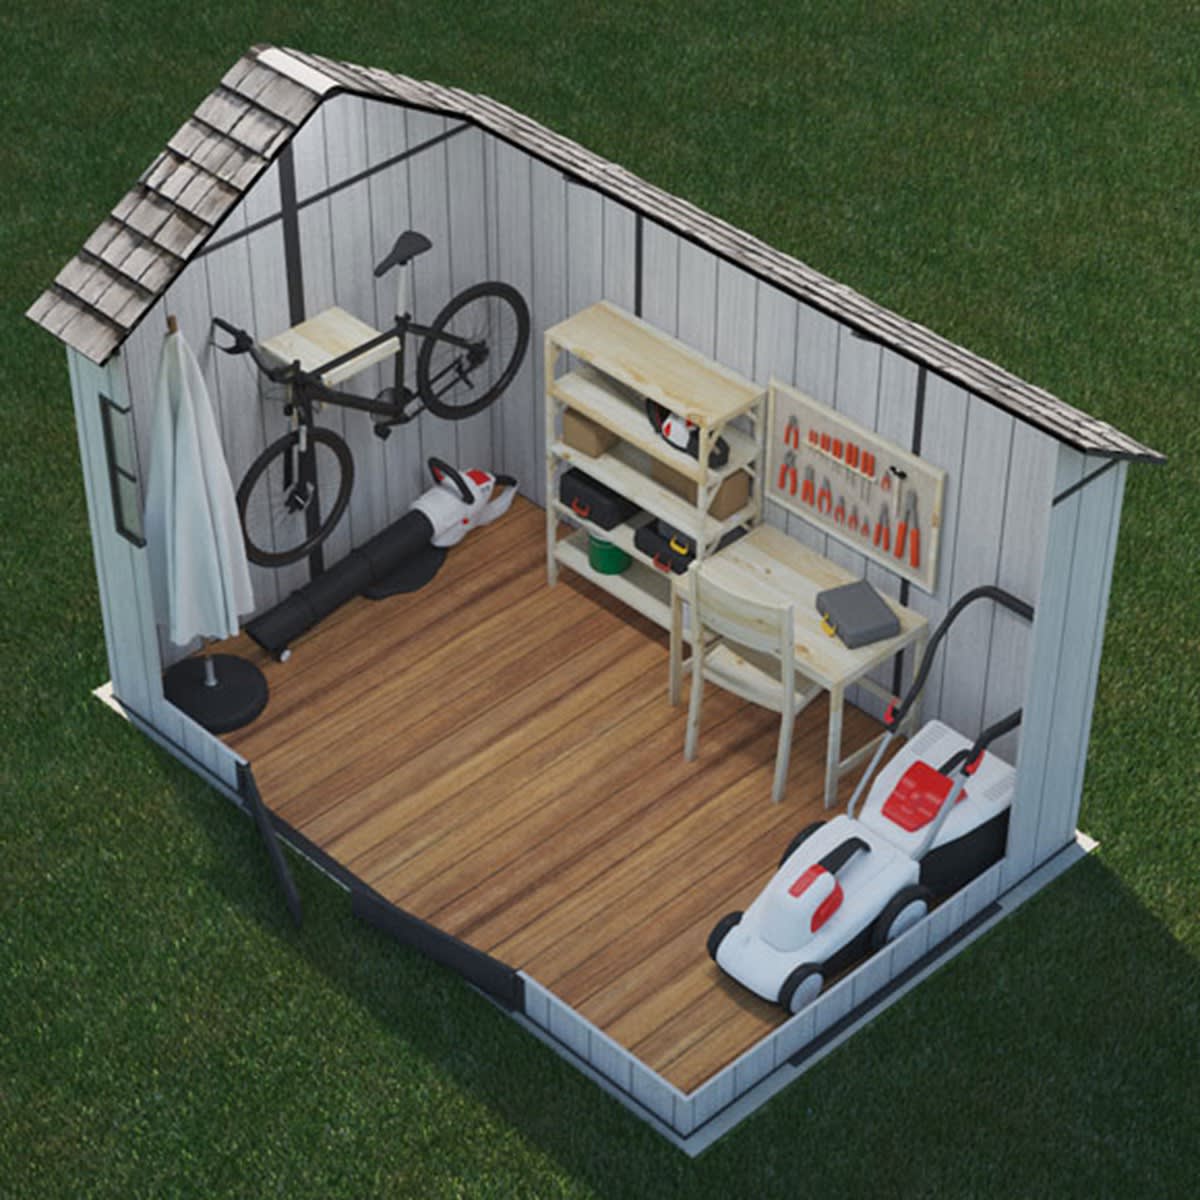 GARDEN SHED OAKLAND THICKNESS 20MM EXTERNAL DIMENSIONS 210X342X254H FLOOR INCLUDED - best price from Maltashopper.com BR500013055